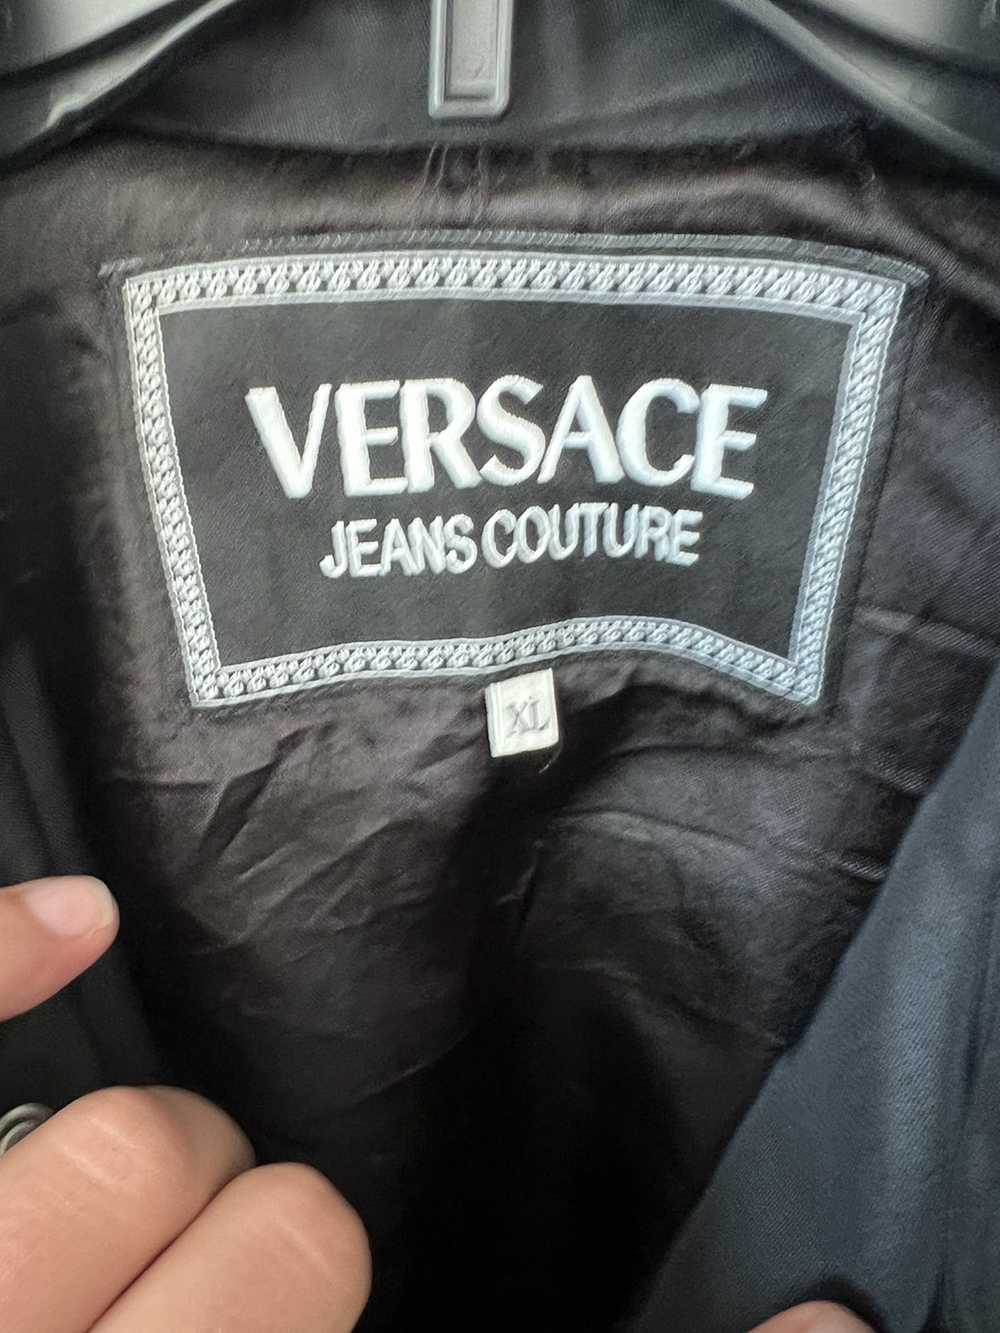 Gianni Versace × Versace × Versace Jeans Couture … - image 4